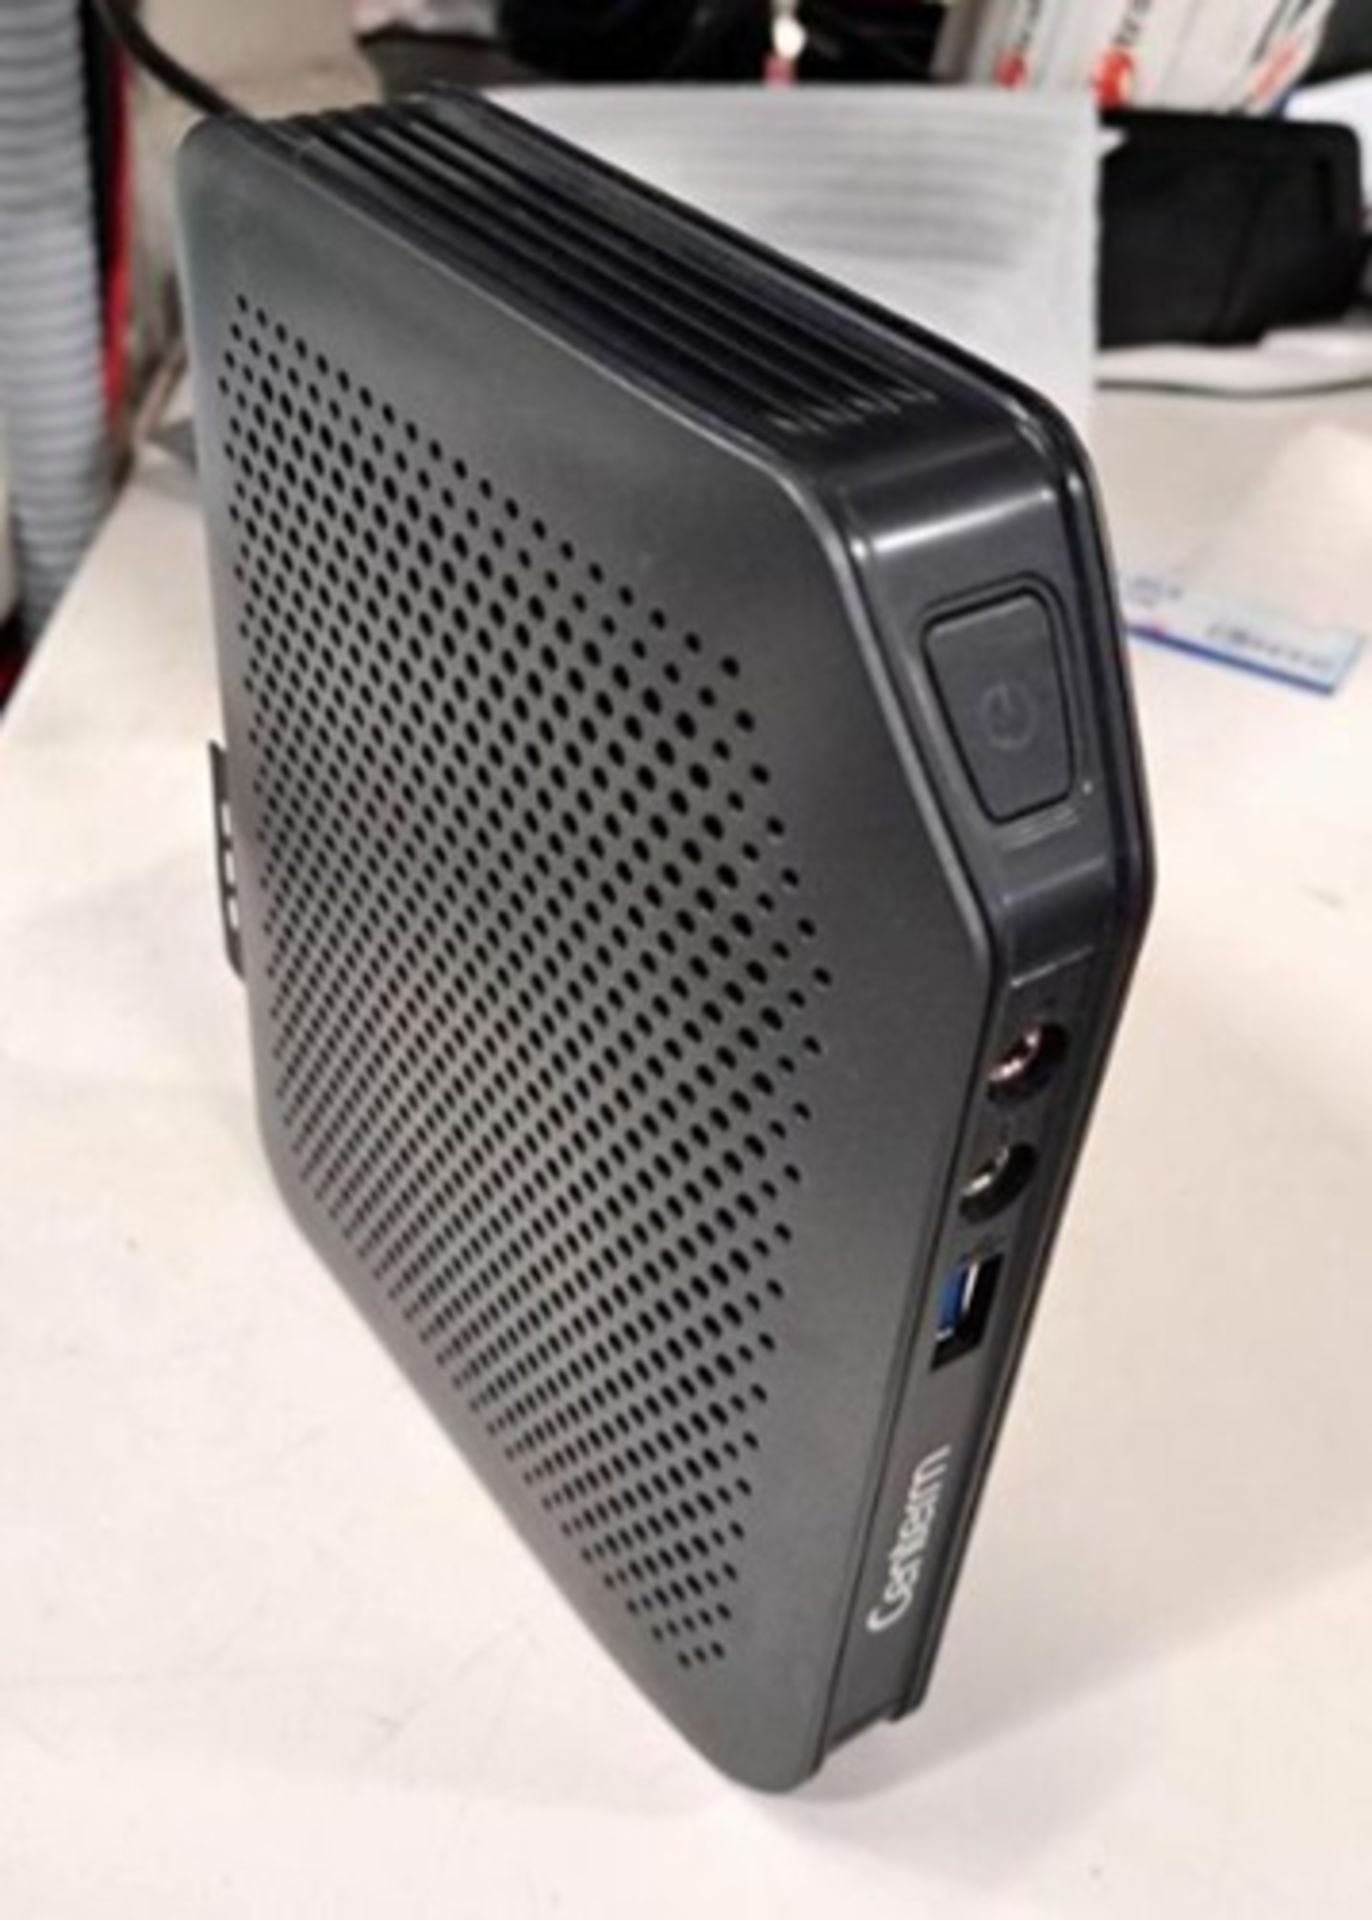 (New equipment) Lot of 2 Thin client containing: 1 Centerm Thin client, F320 Model, SN; Includes 22